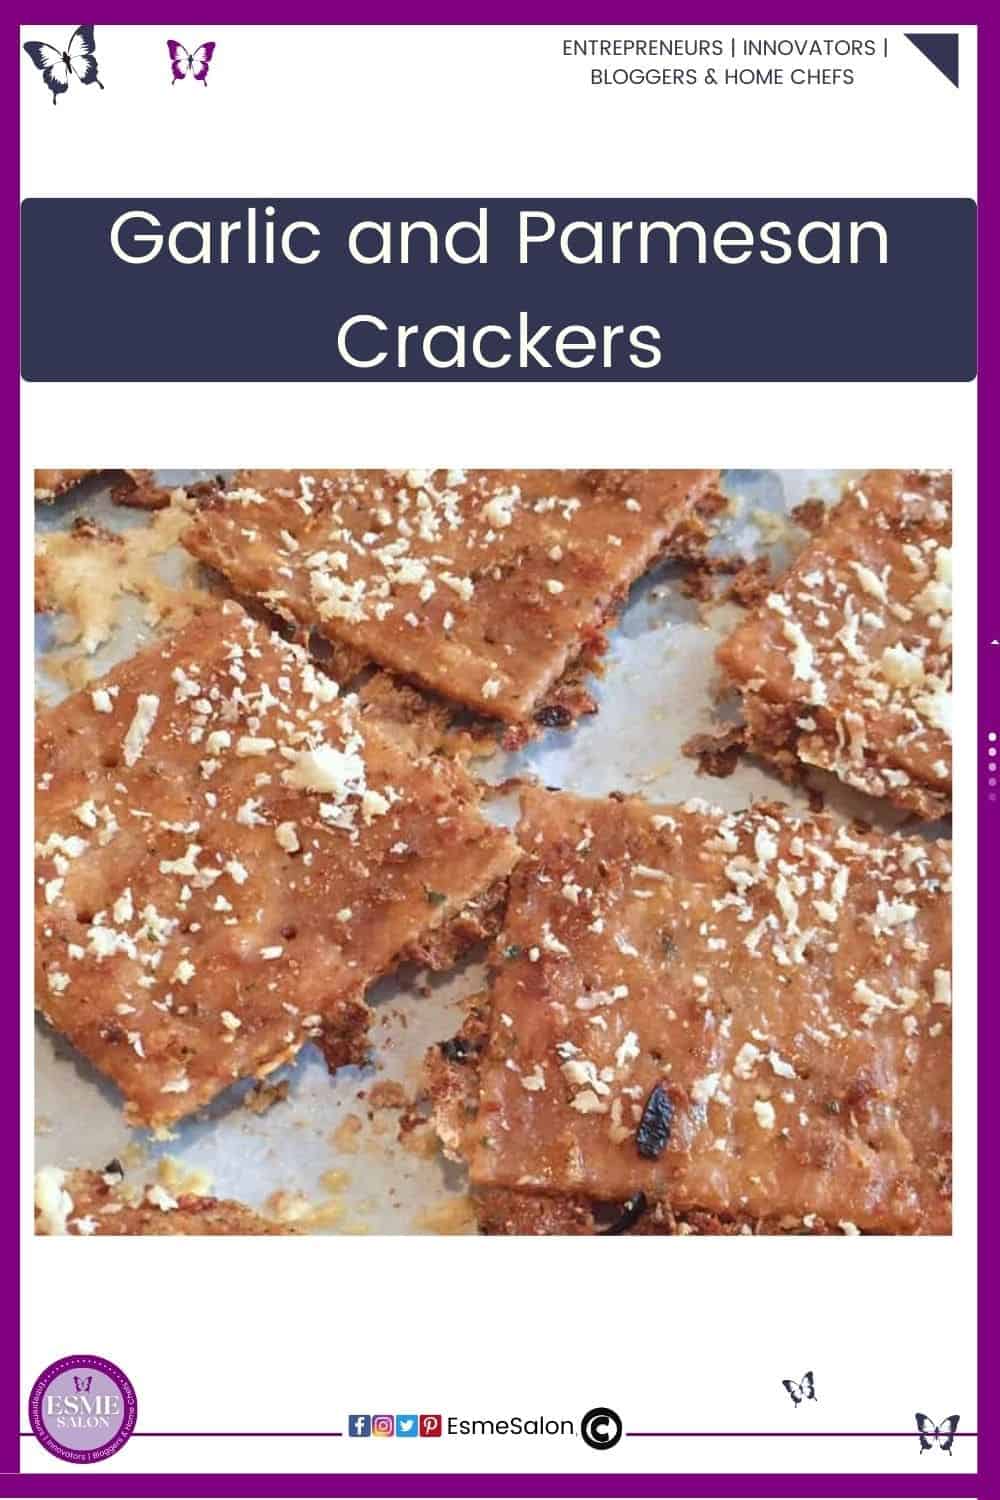 an image of baked and unbaked Garlic and Parmesan Crackers